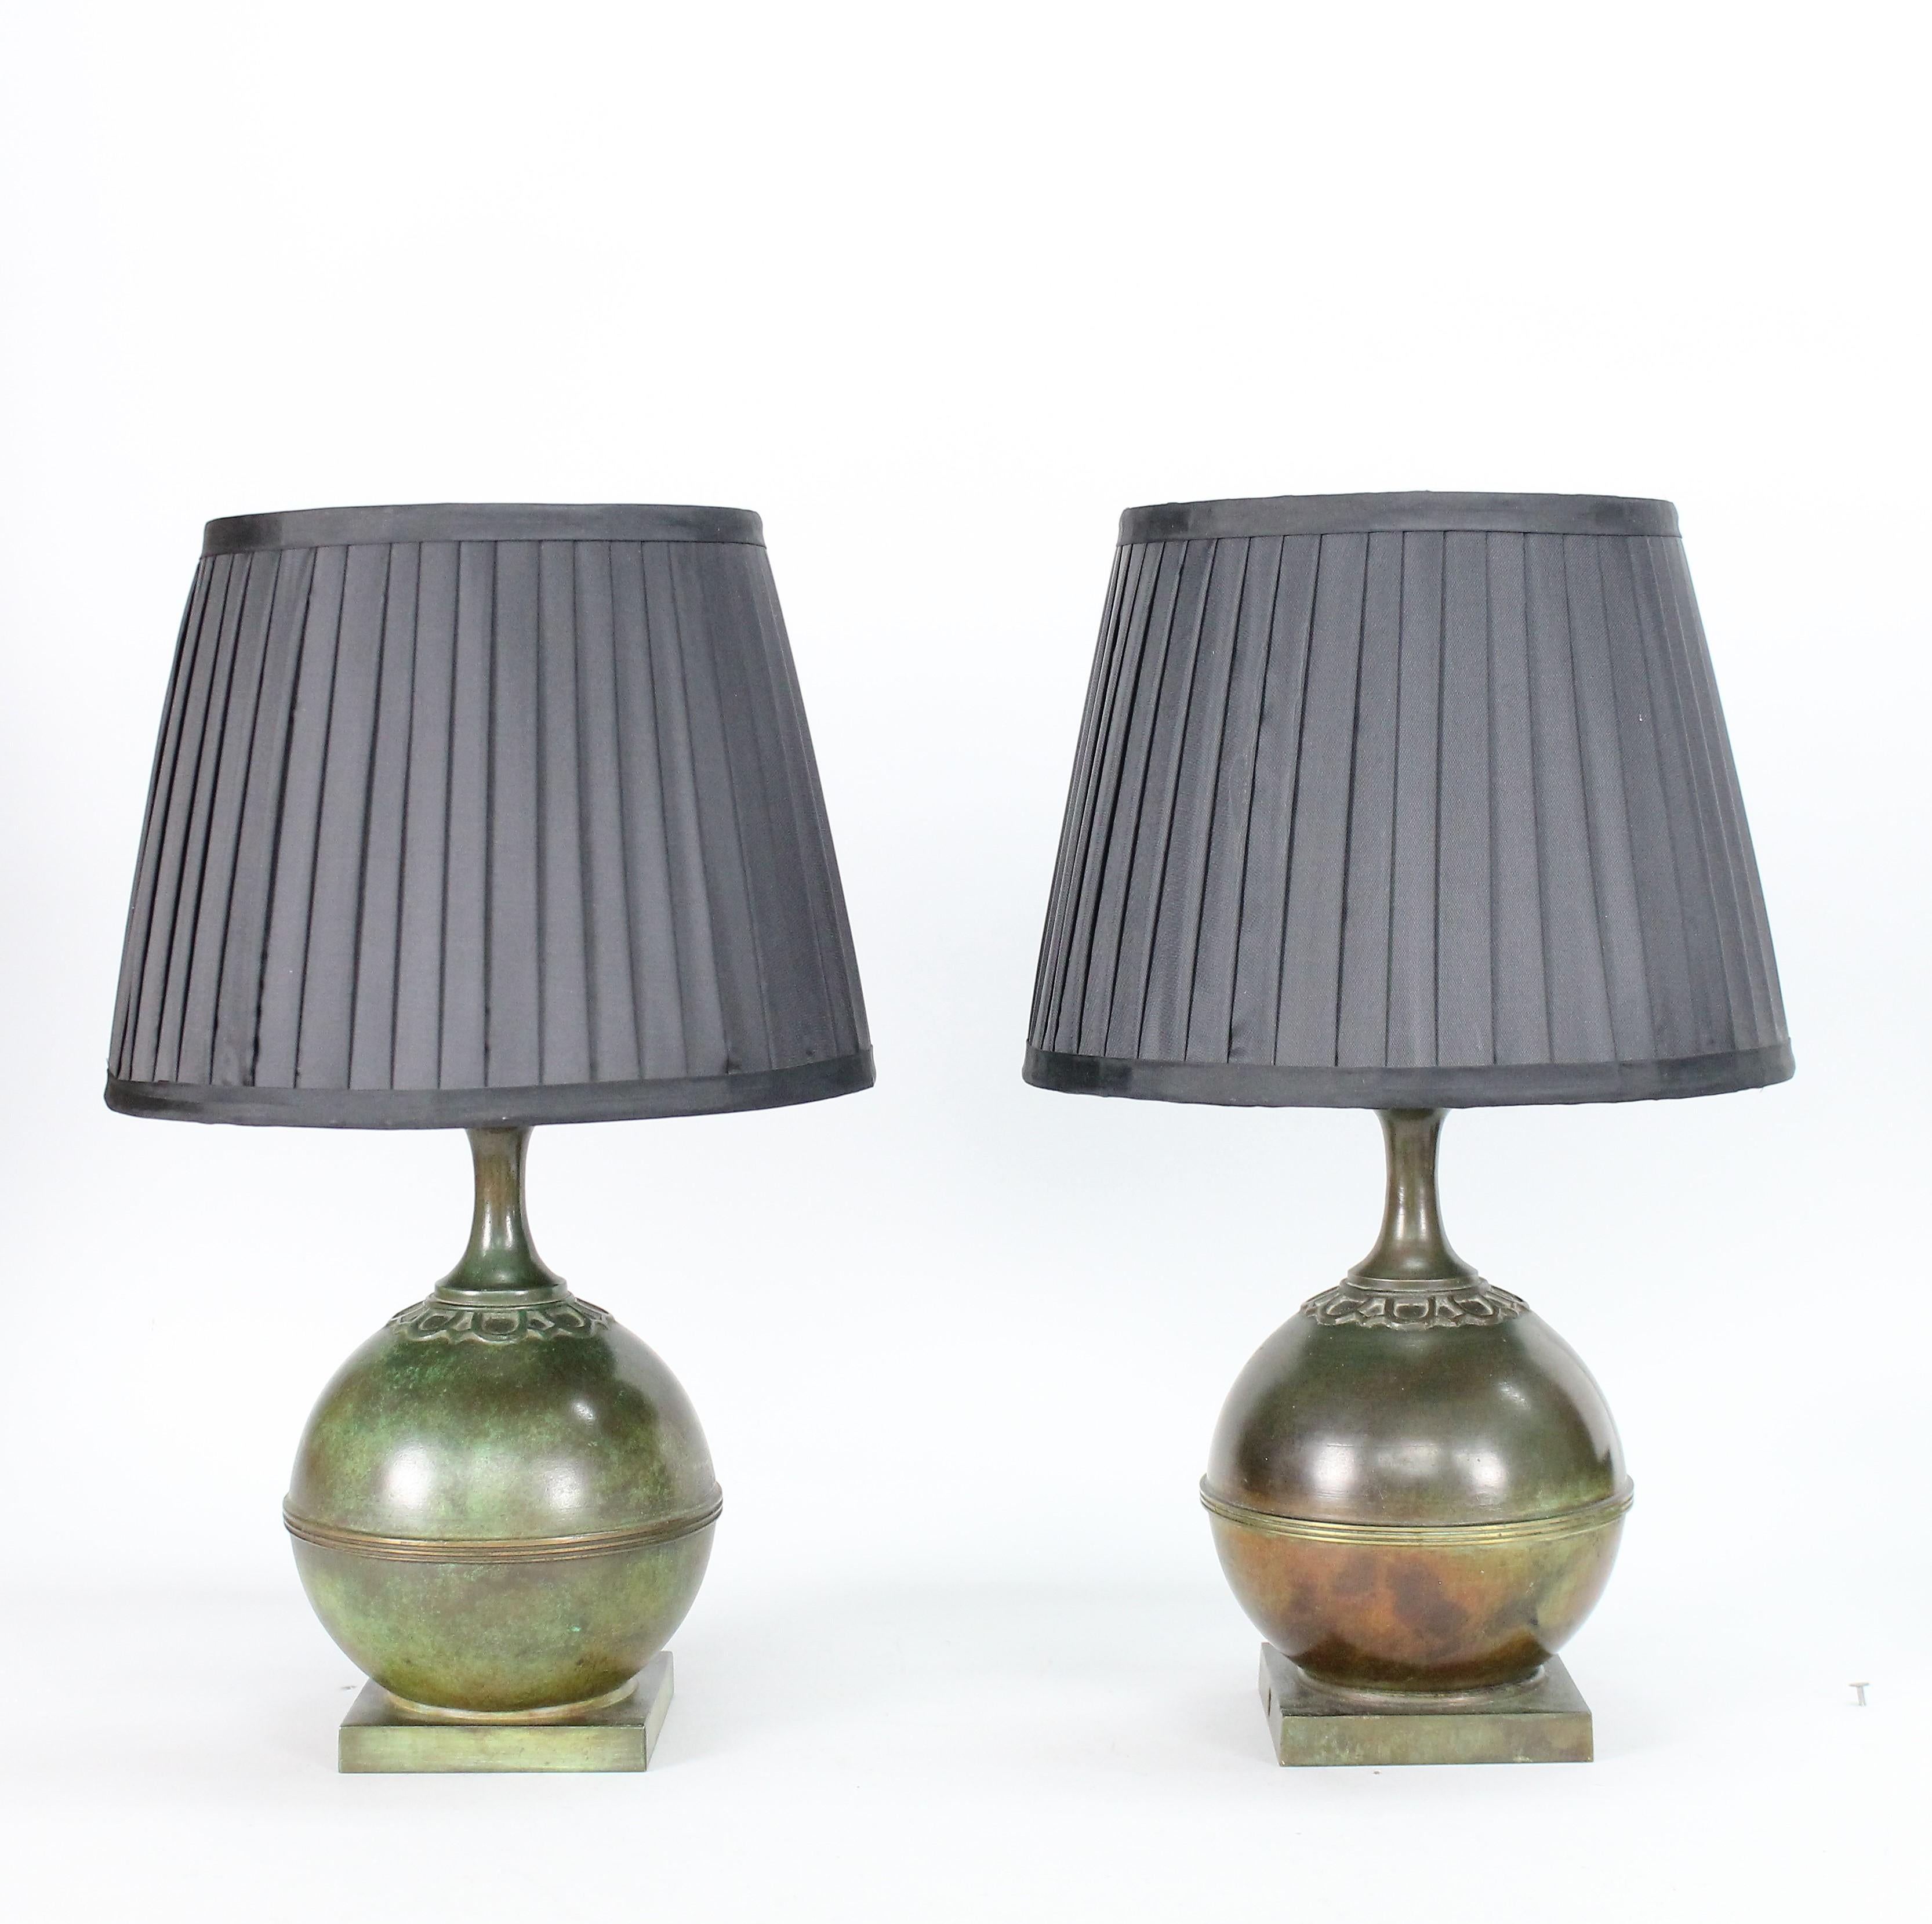 A great pair of green/brown bronze patinated 1930s table lamps.
Made by Guldsmedsaktiebolaget (GAB) in Stockholm Sweden.
In full working order and wired with European electrical standard.

There are of course some minor insignificant differences